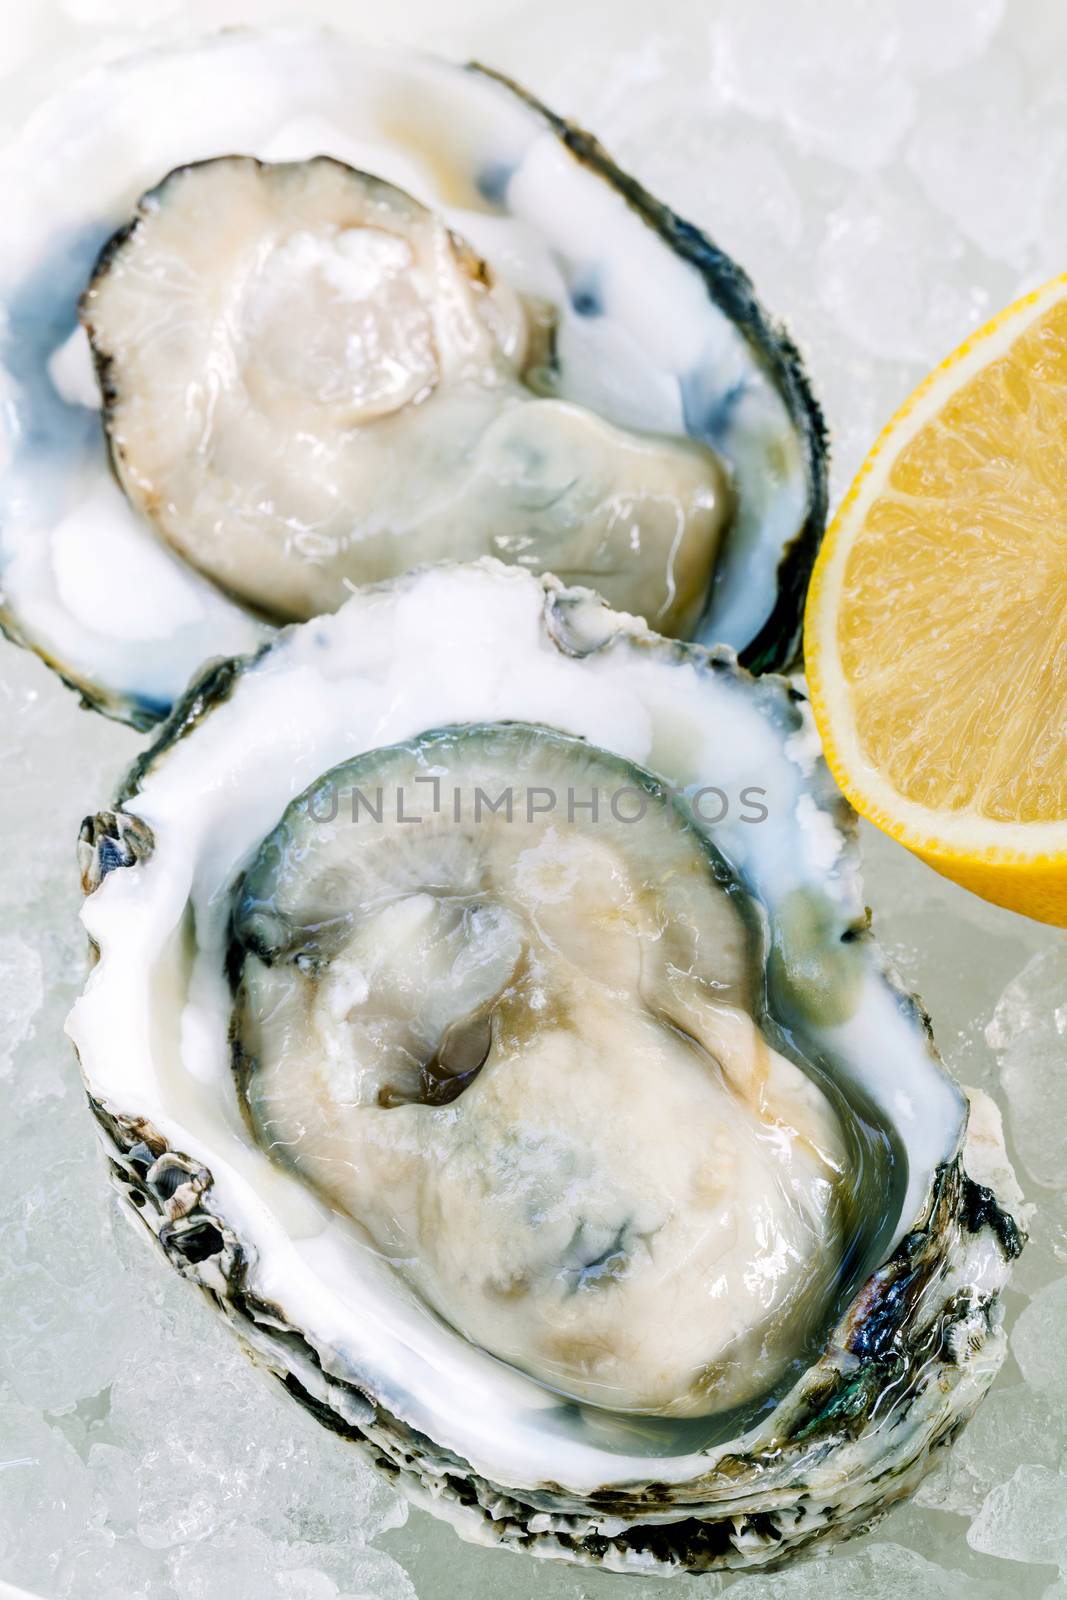 Fresh Oysters with lemon on ice background. Opened fresh oysters by kerdkanno